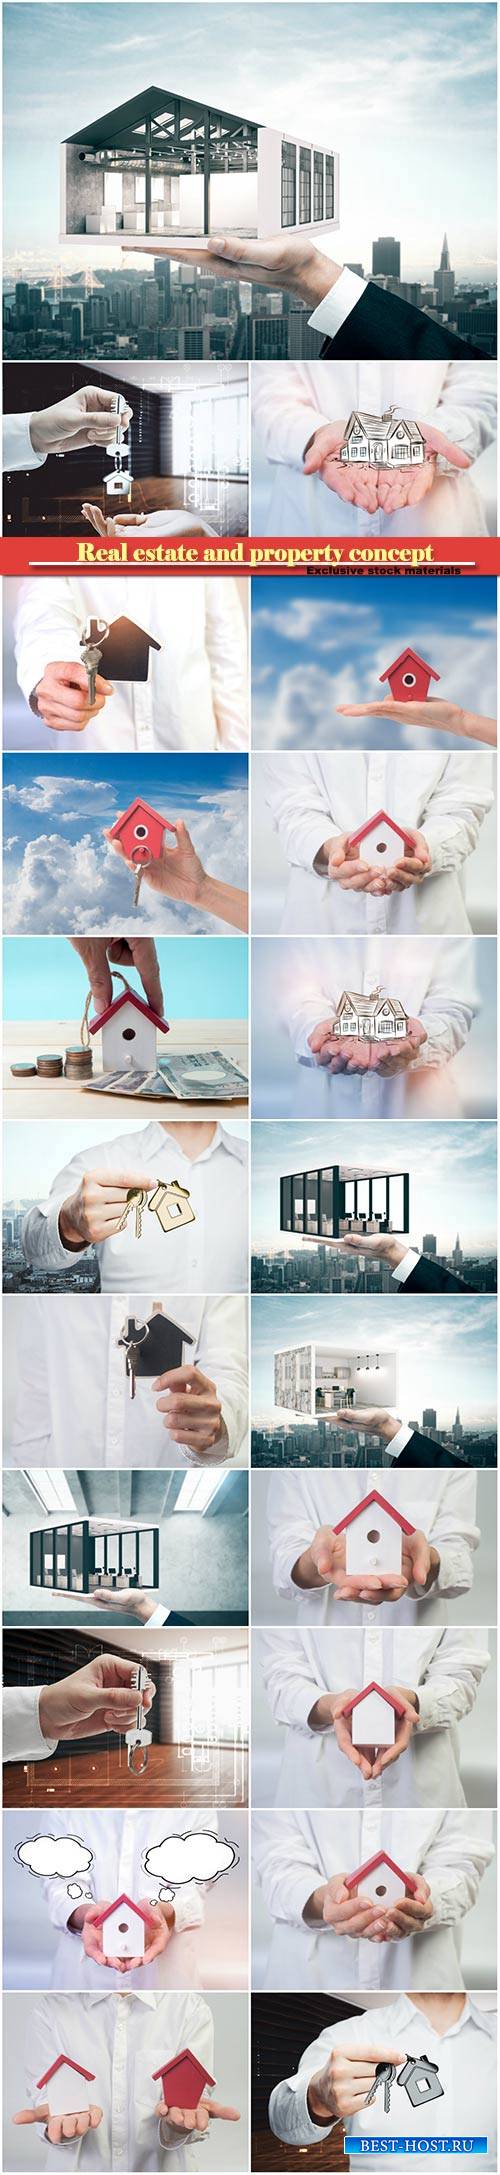 Real estate and property concept, close up of hands holding house or home m ...